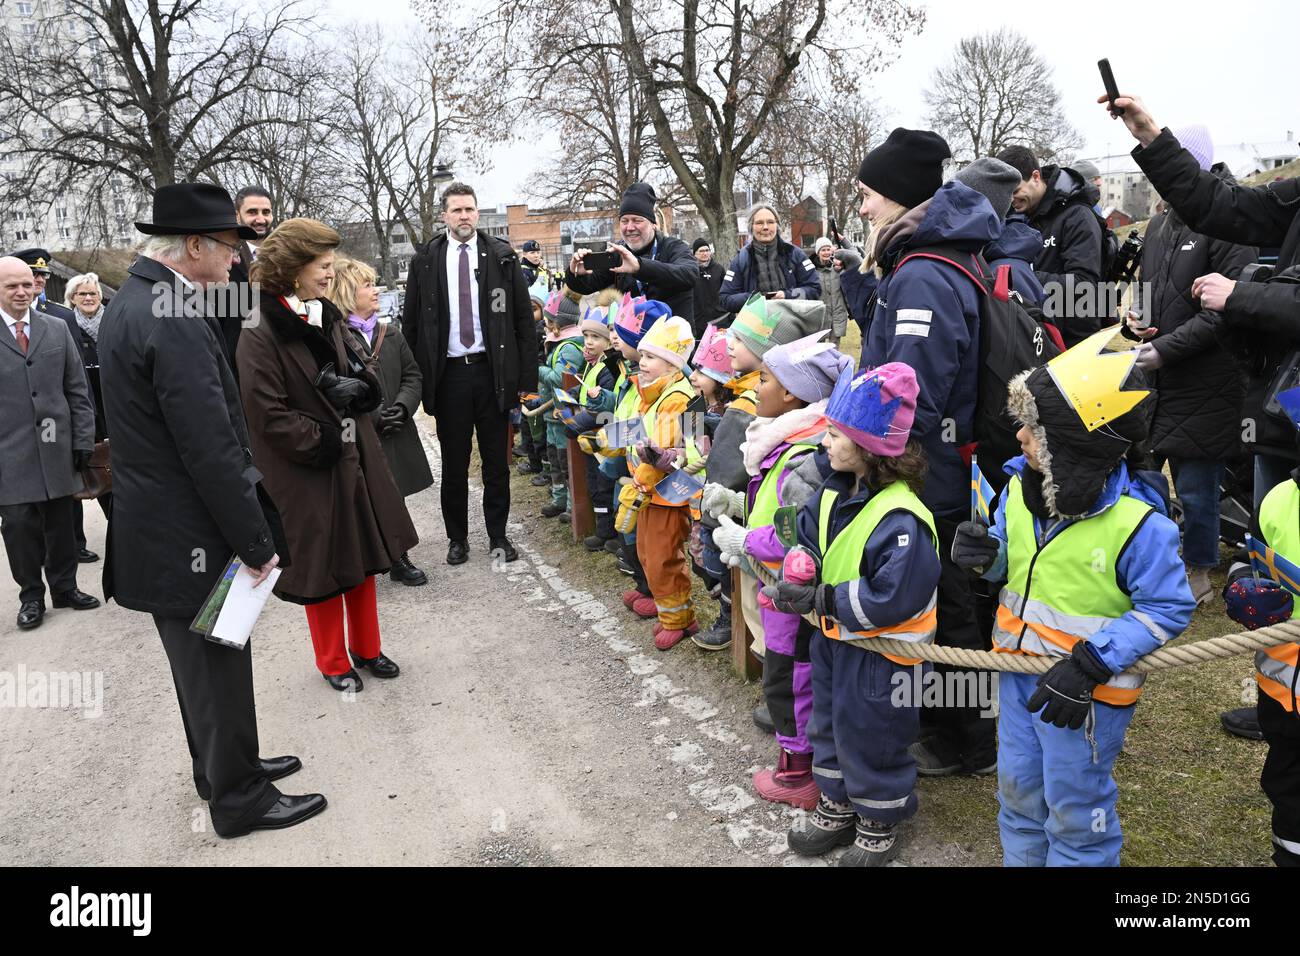 Sweden's King Carl XVI Gustaf and Queen Silvia are greeted by children during their walk to Nykoping Castle during the royal visit to Sodermanland Cou Stock Photo